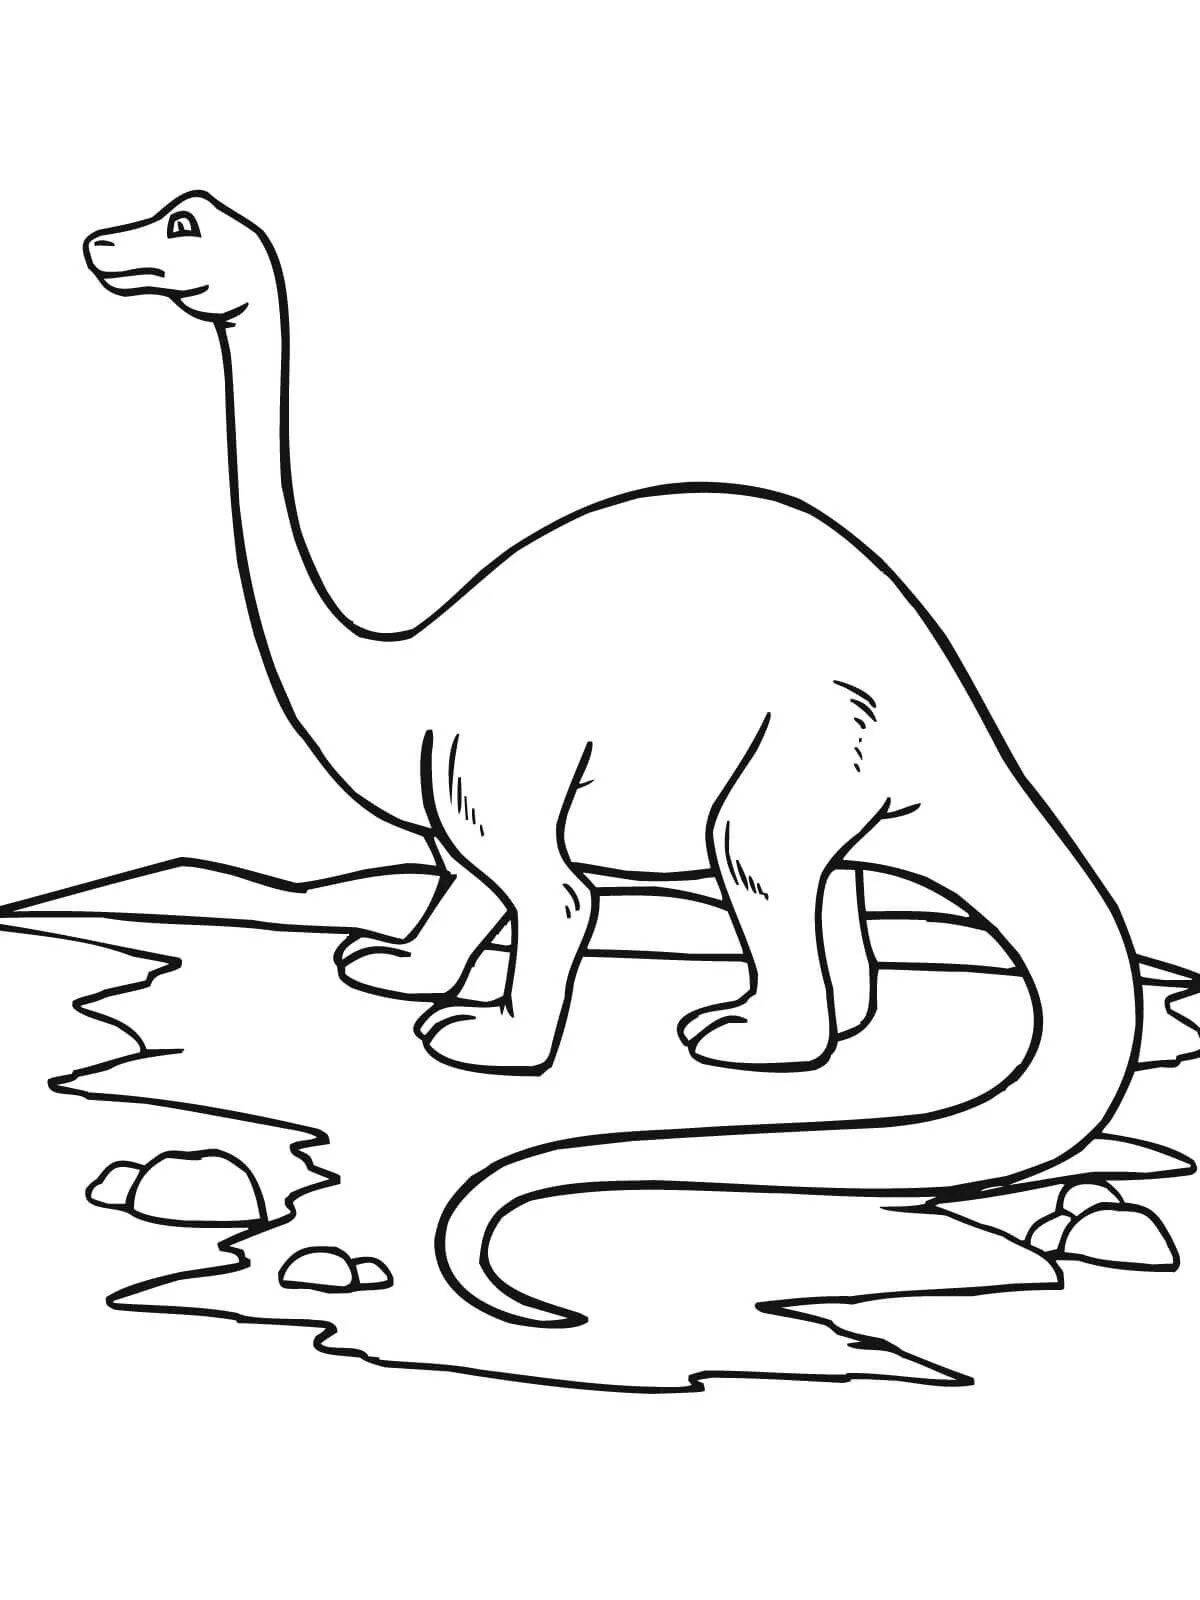 Bright diplodocus coloring page